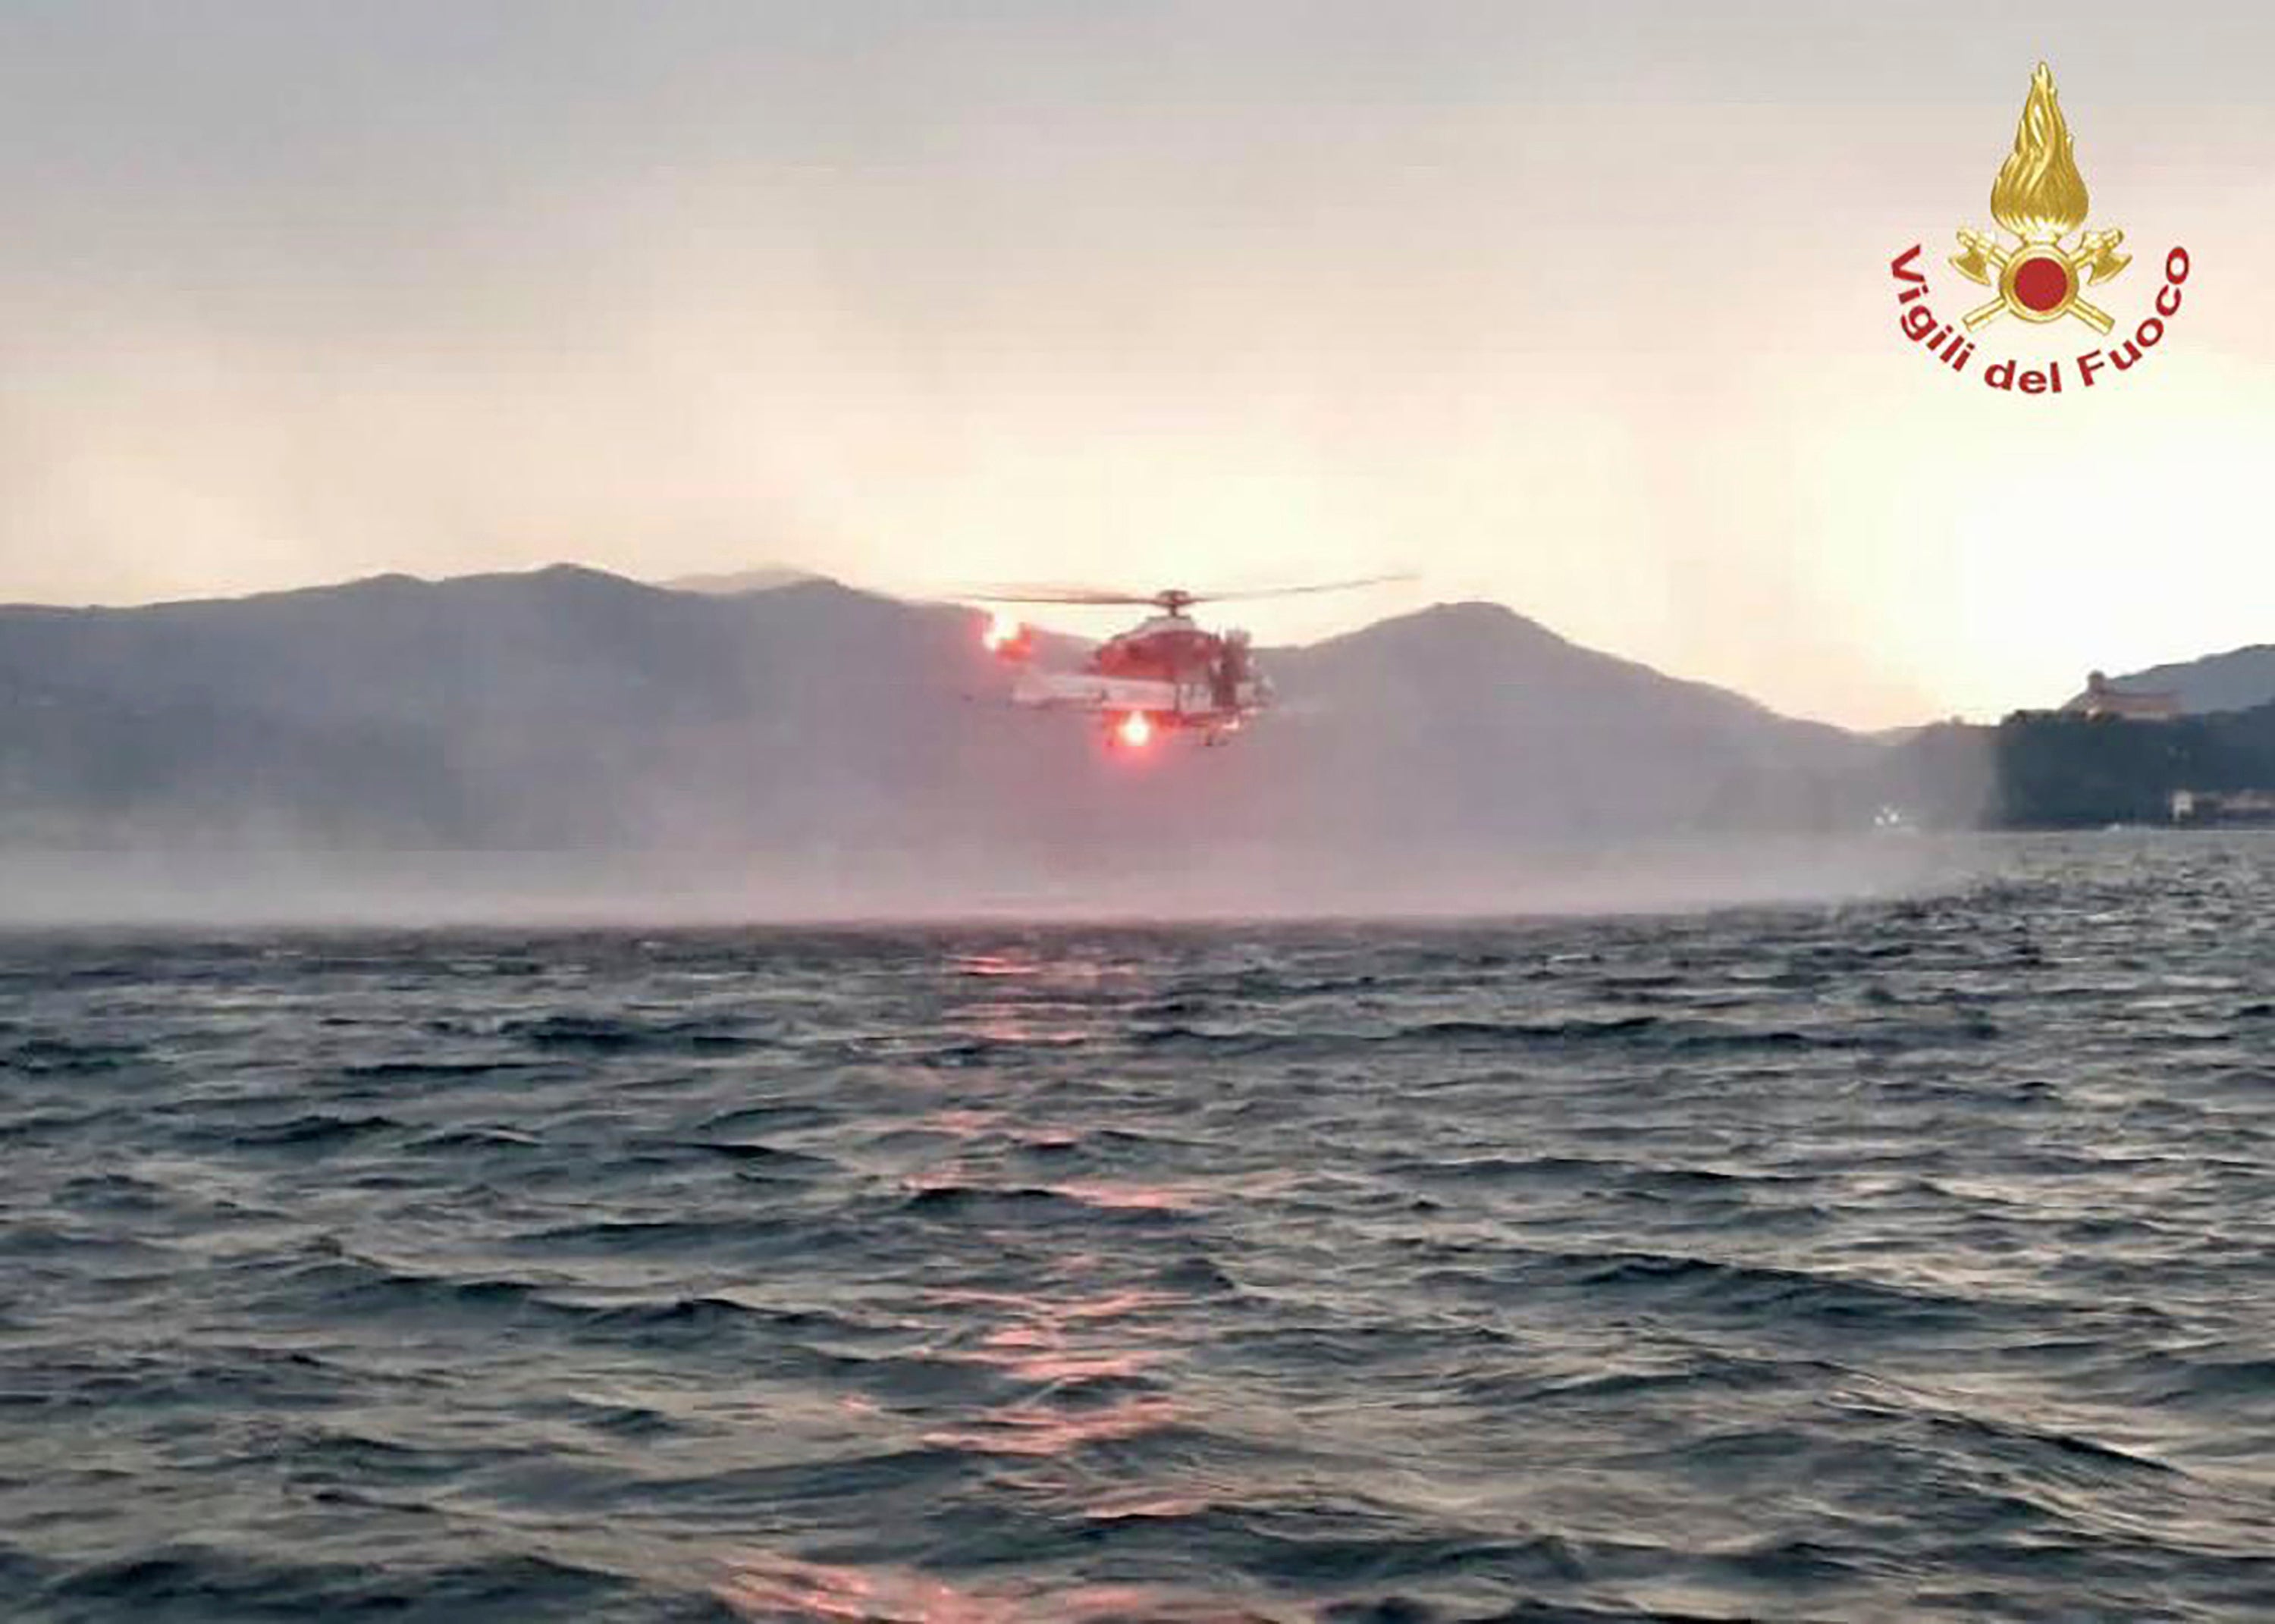 Italian firefighters confirmed on Monday that they recovered four bodies from Lake Maggiore